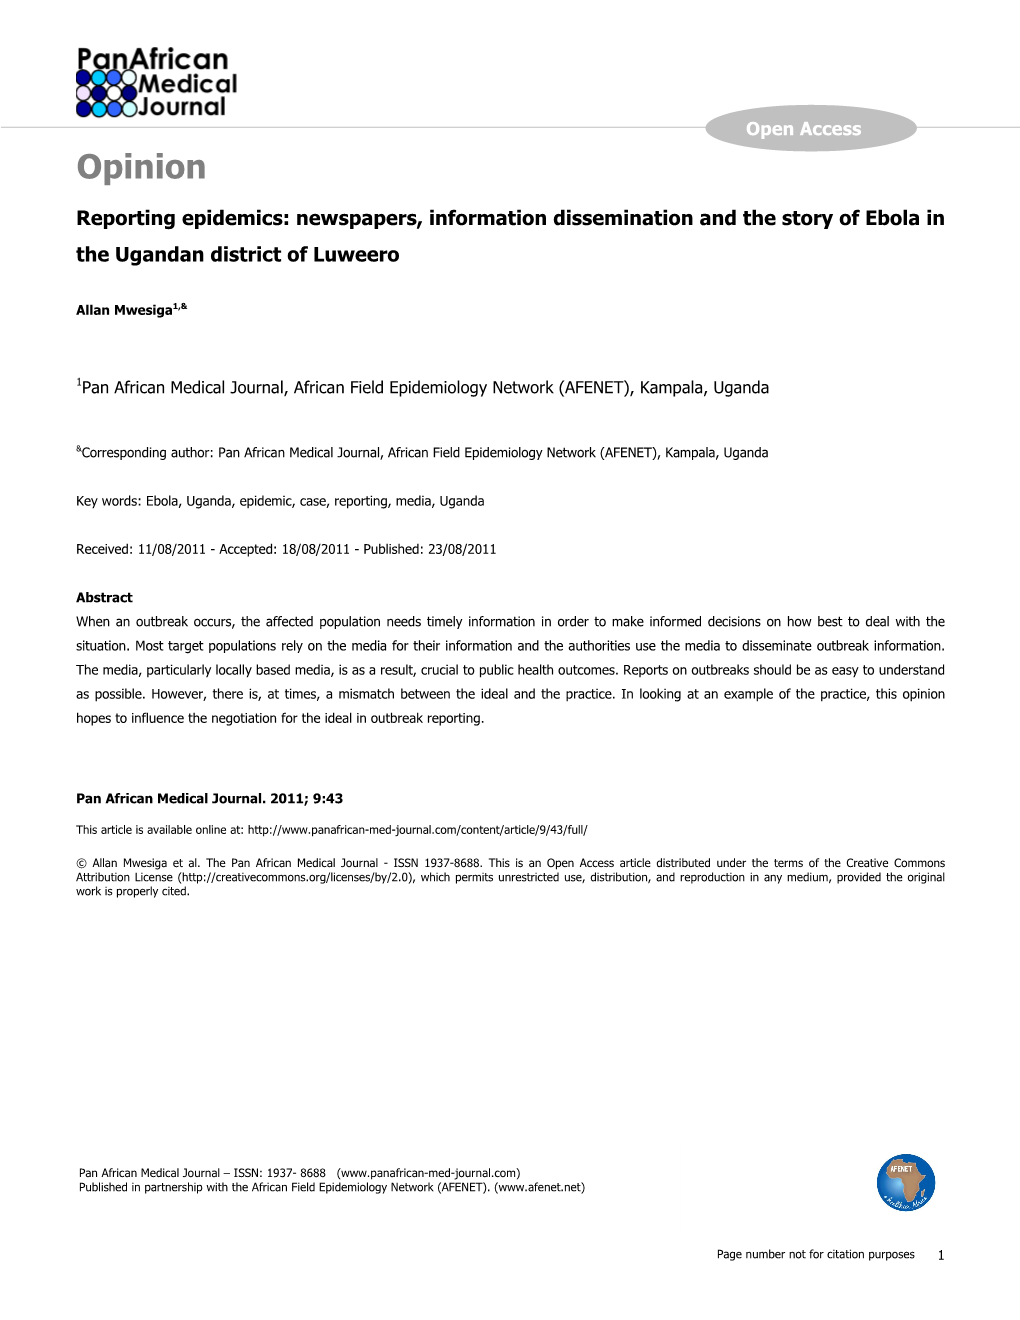 Opinion Reporting Epidemics: Newspapers, Information Dissemination and the Story of Ebola in the Ugandan District of Luweero